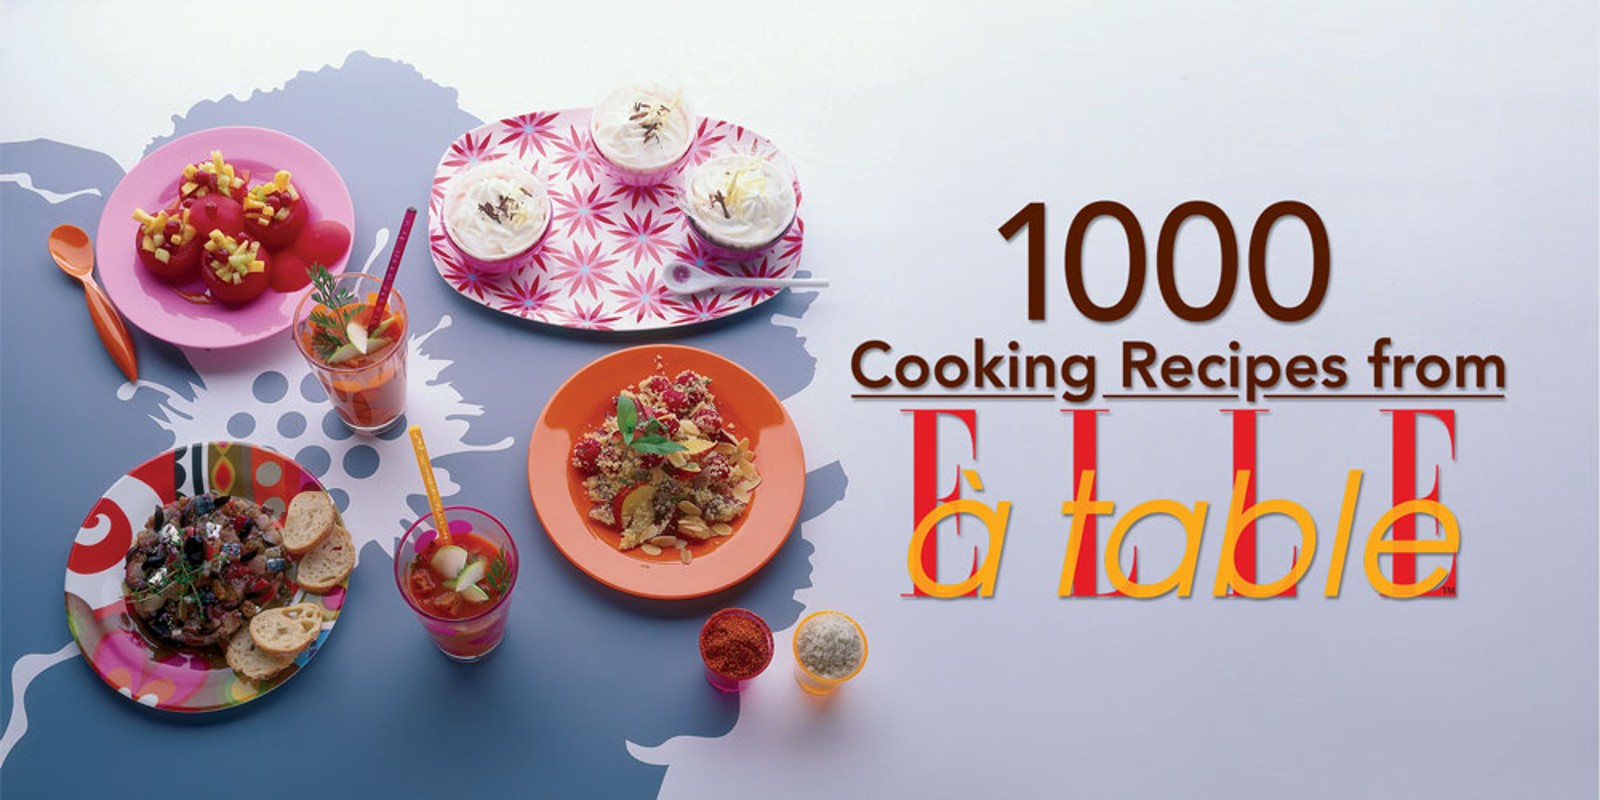 1000 Cooking Recipes from ELLE à table